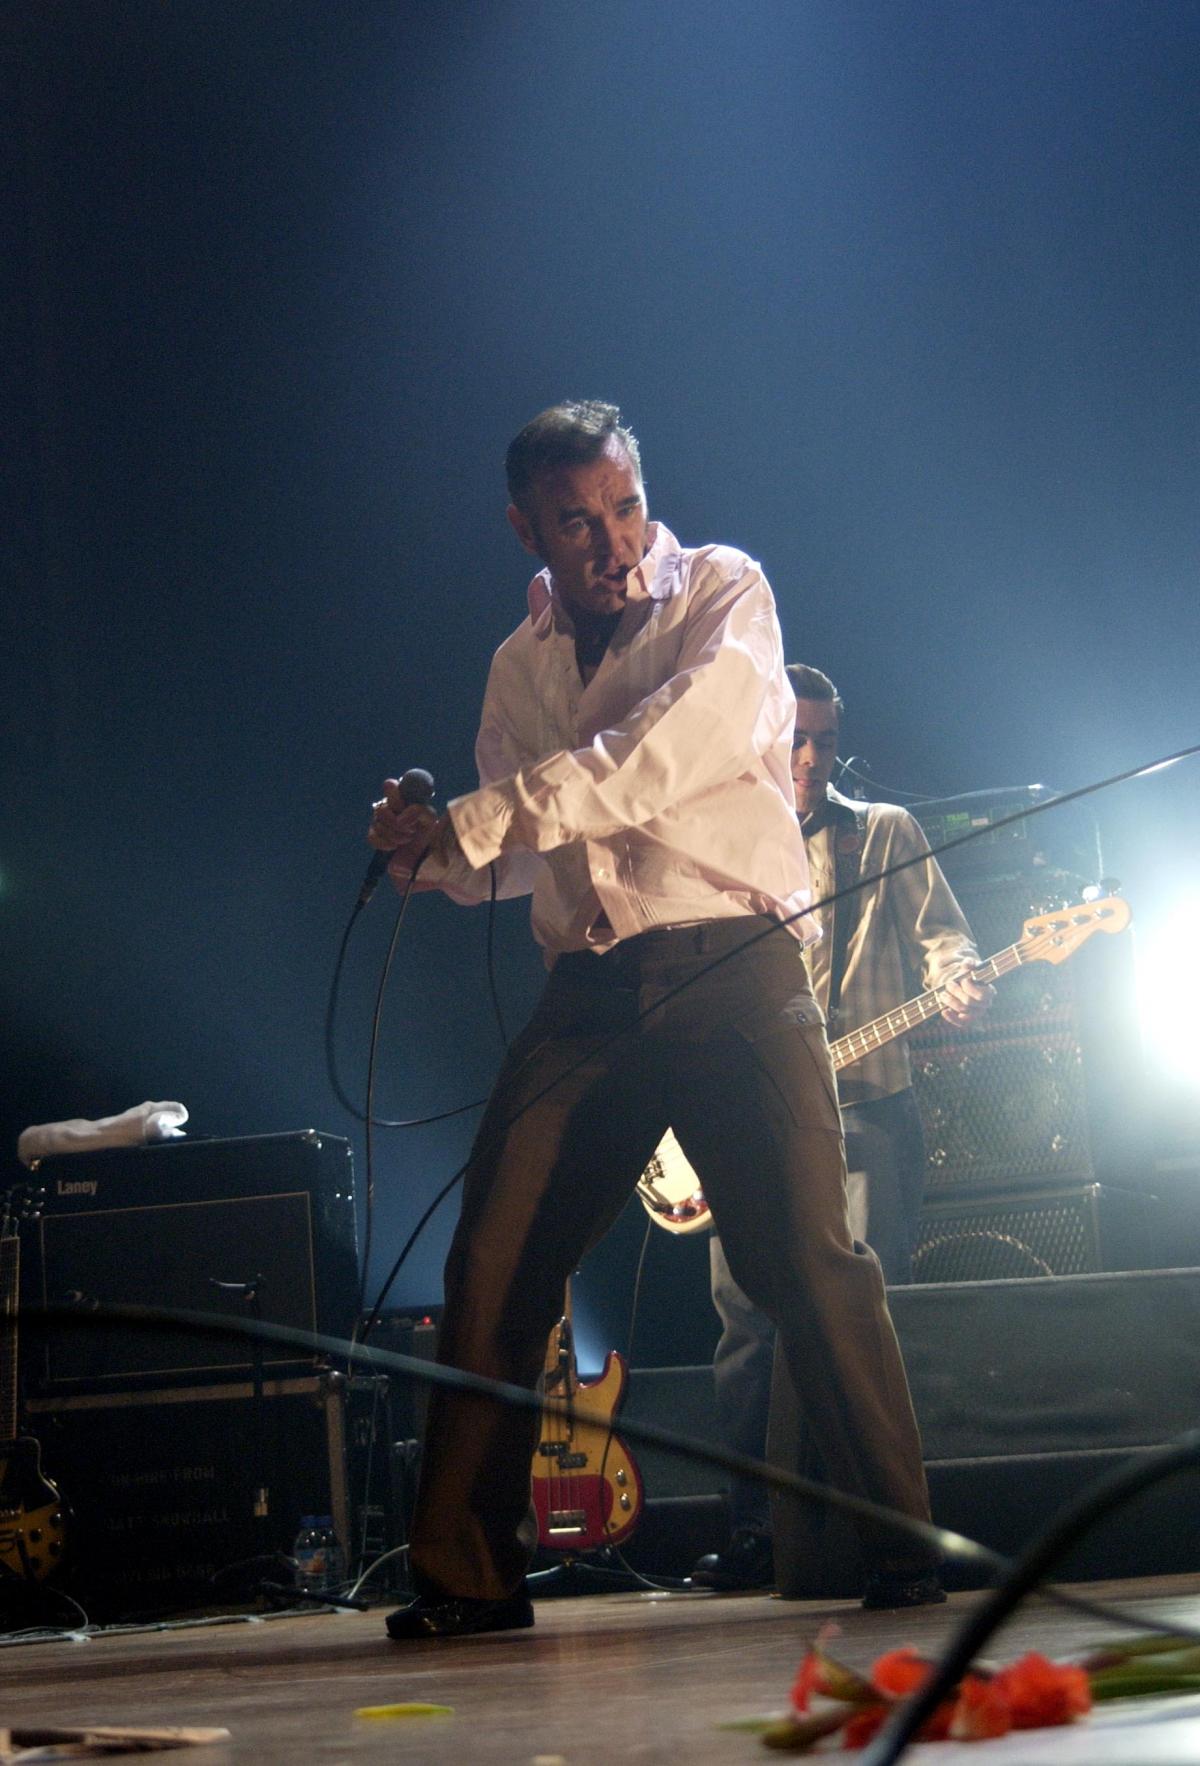 Morrissey's the showman at St George's Hall